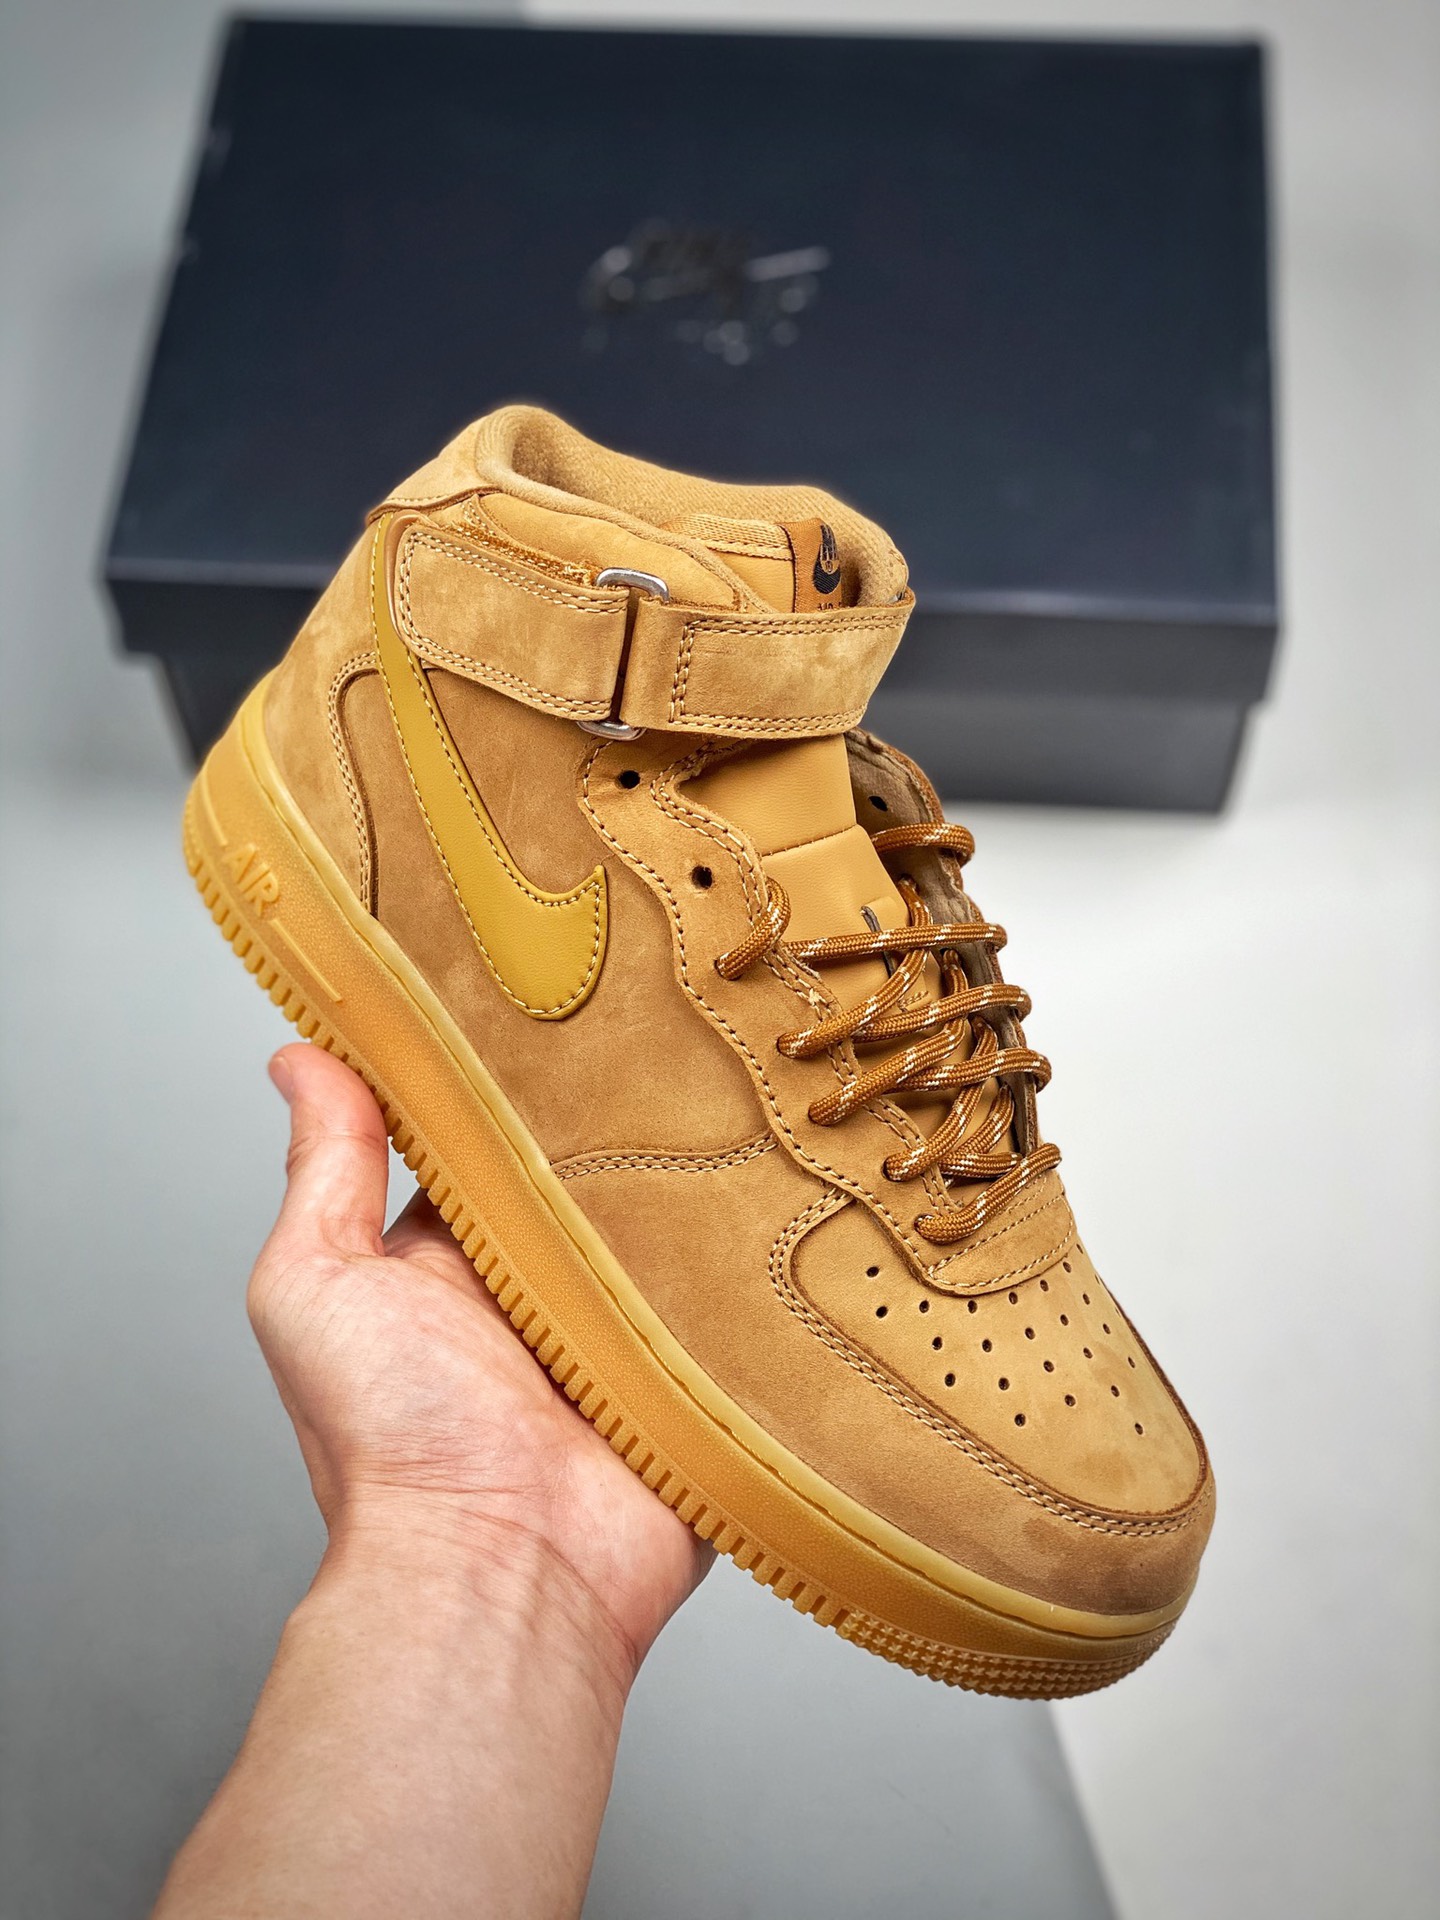 nike air force 1 wheat for sale